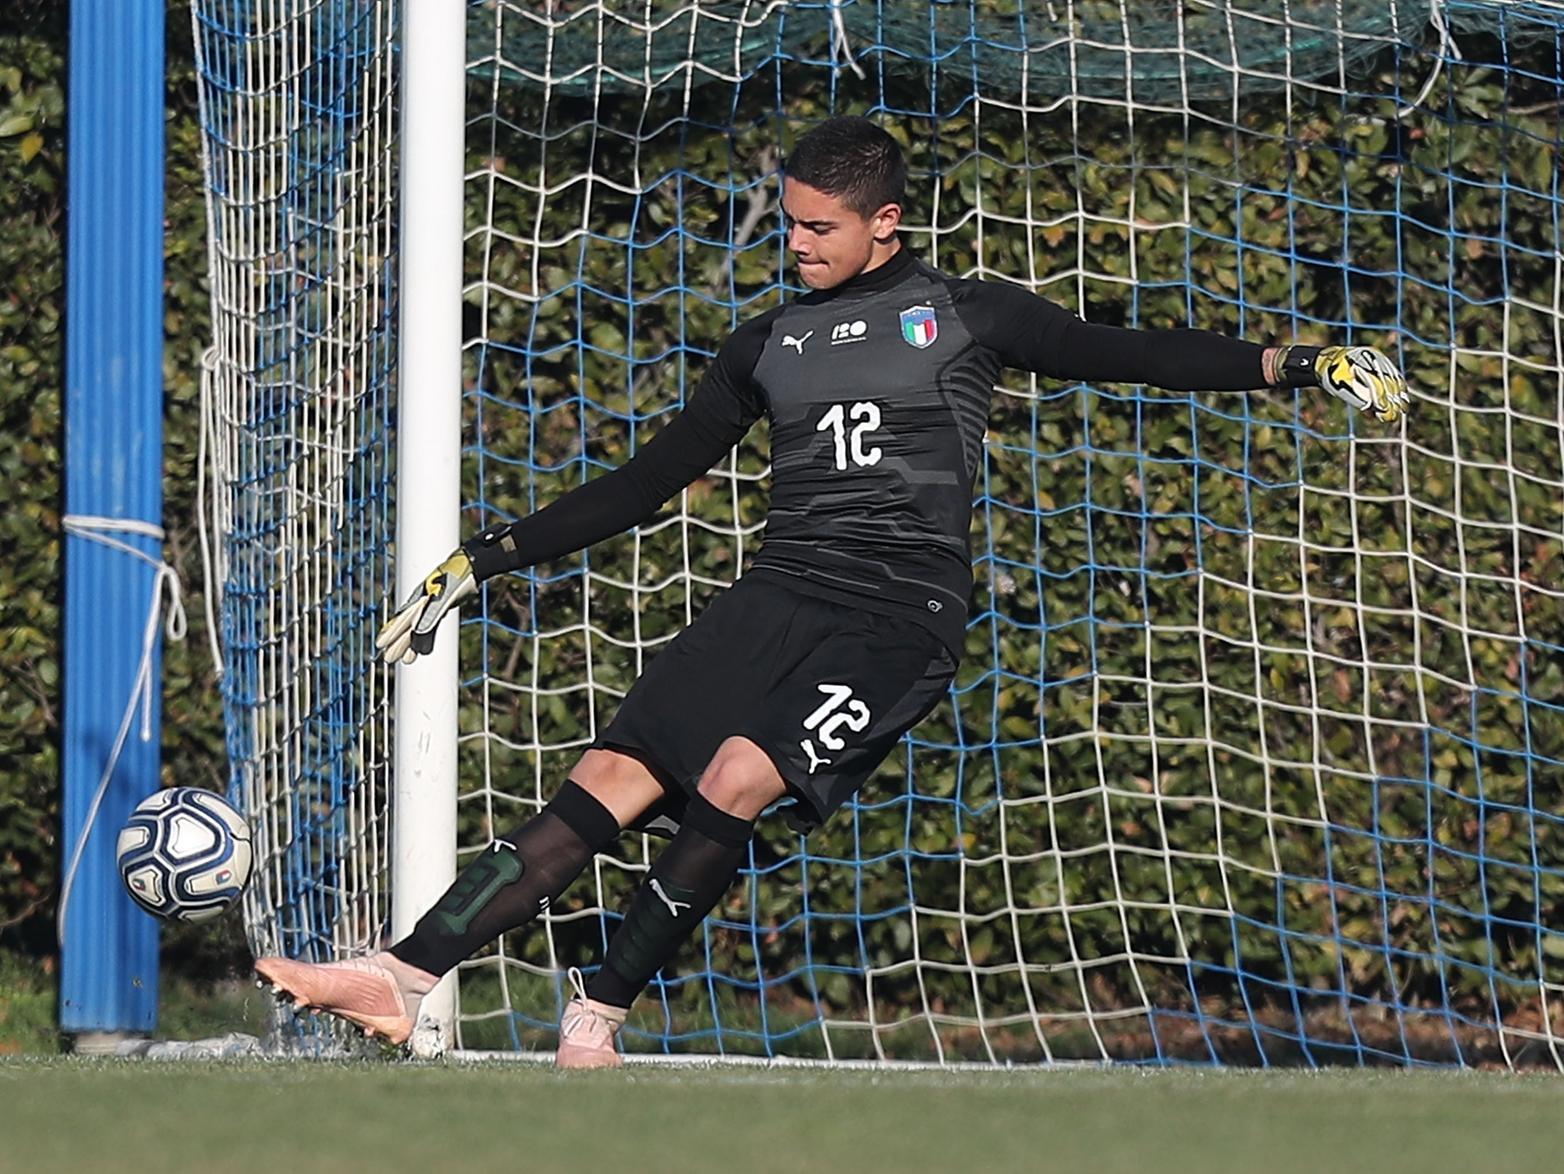 Reports from Italy have suggested that Leeds United are close to signing Italy U18 international goalkeeper Elia Caprile, who could join from Chievo this month. (Sport Witness)